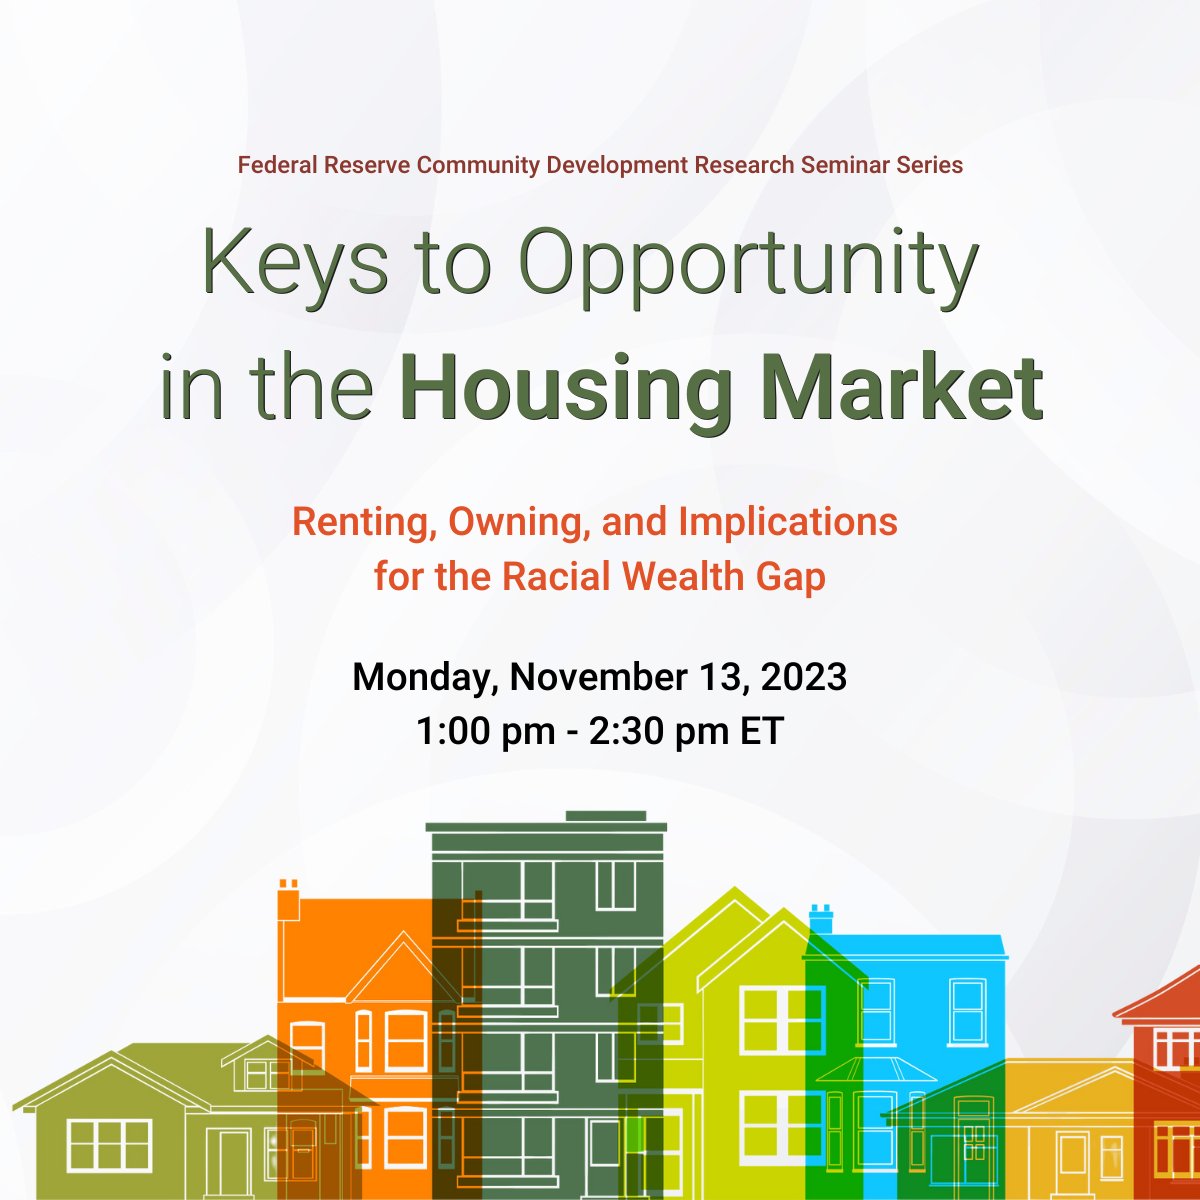 Join us for a research-driven discussion organized by the @bostonfed and the @sffed around efforts to increase rental affordability, access to homeownership, and housing stability. Register now: cvent.me/Yy2oaA